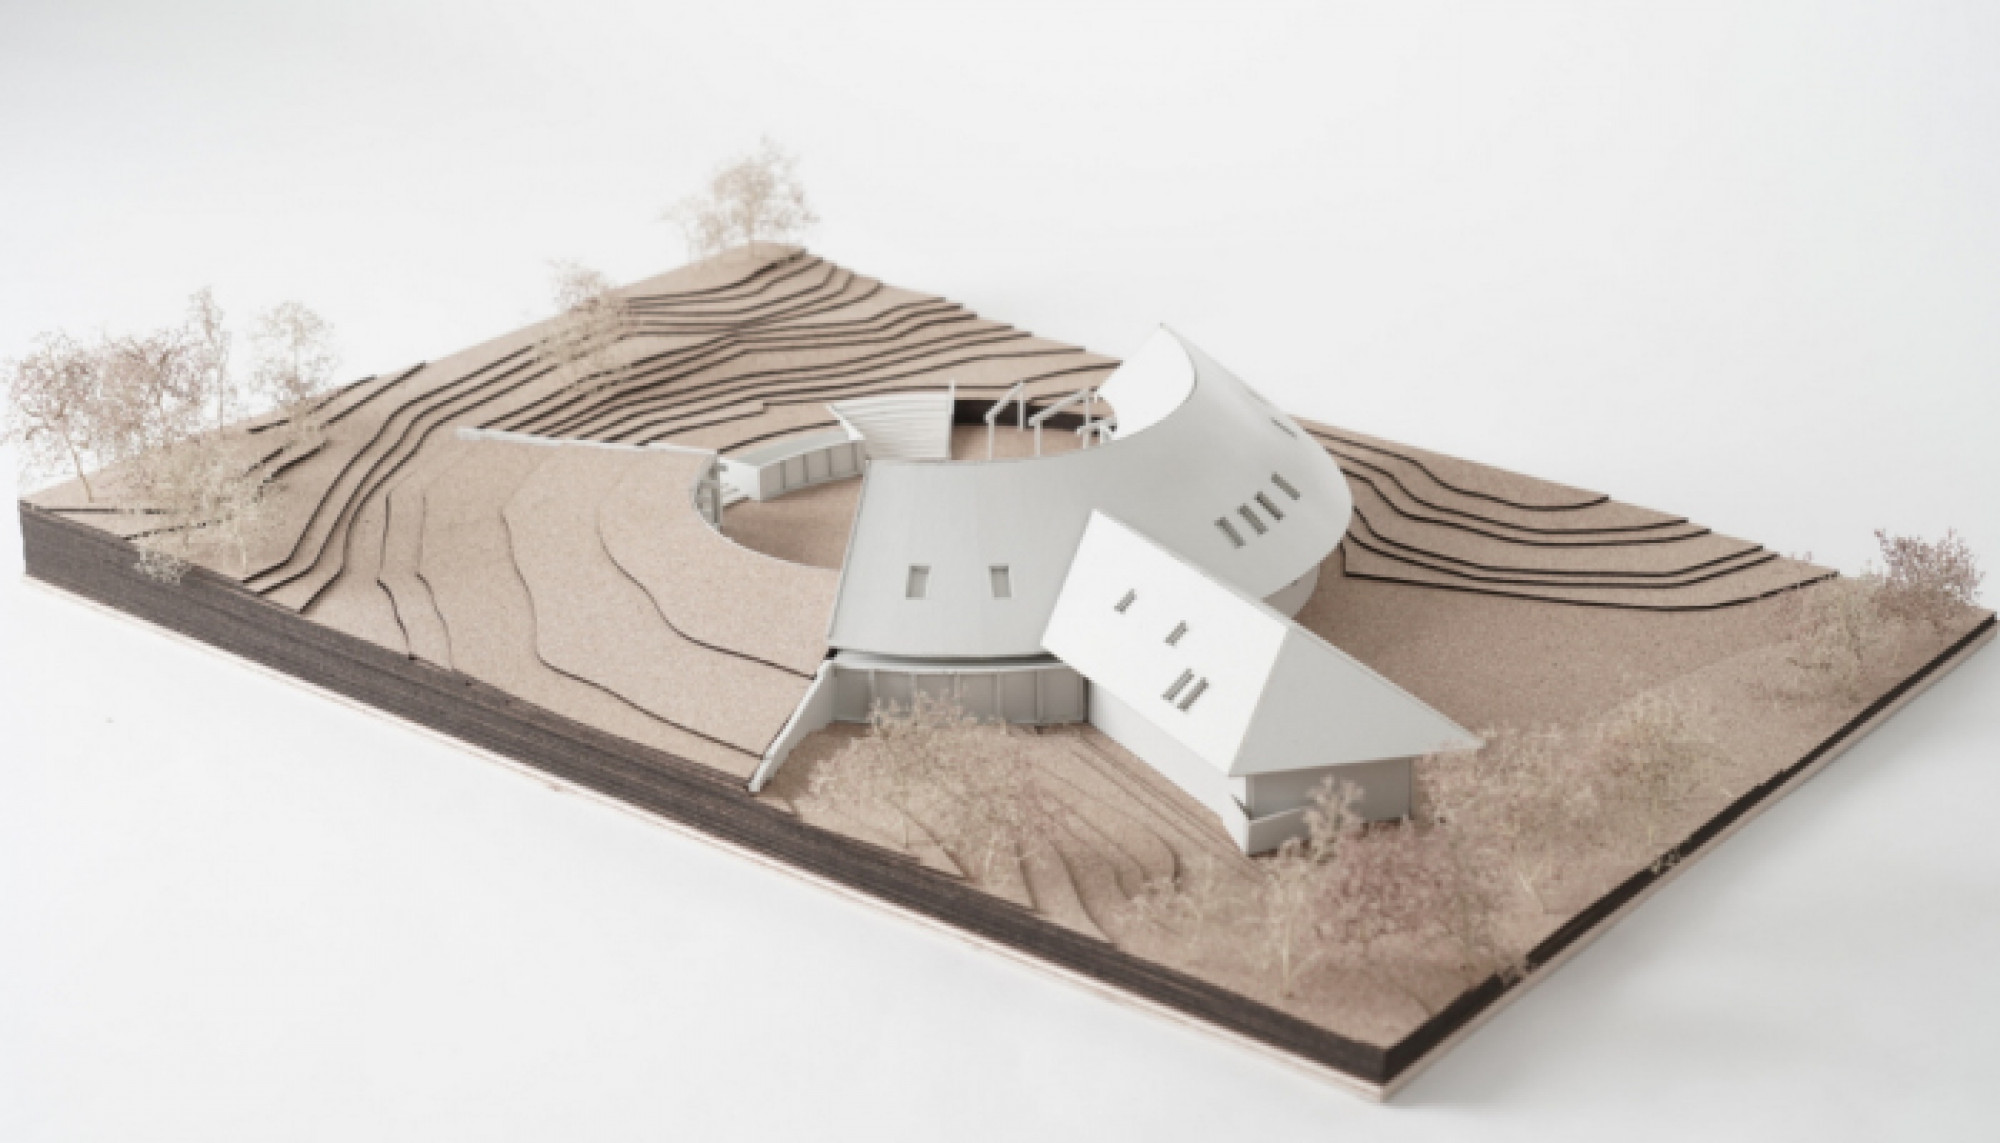 The Benefits of Architectural Models